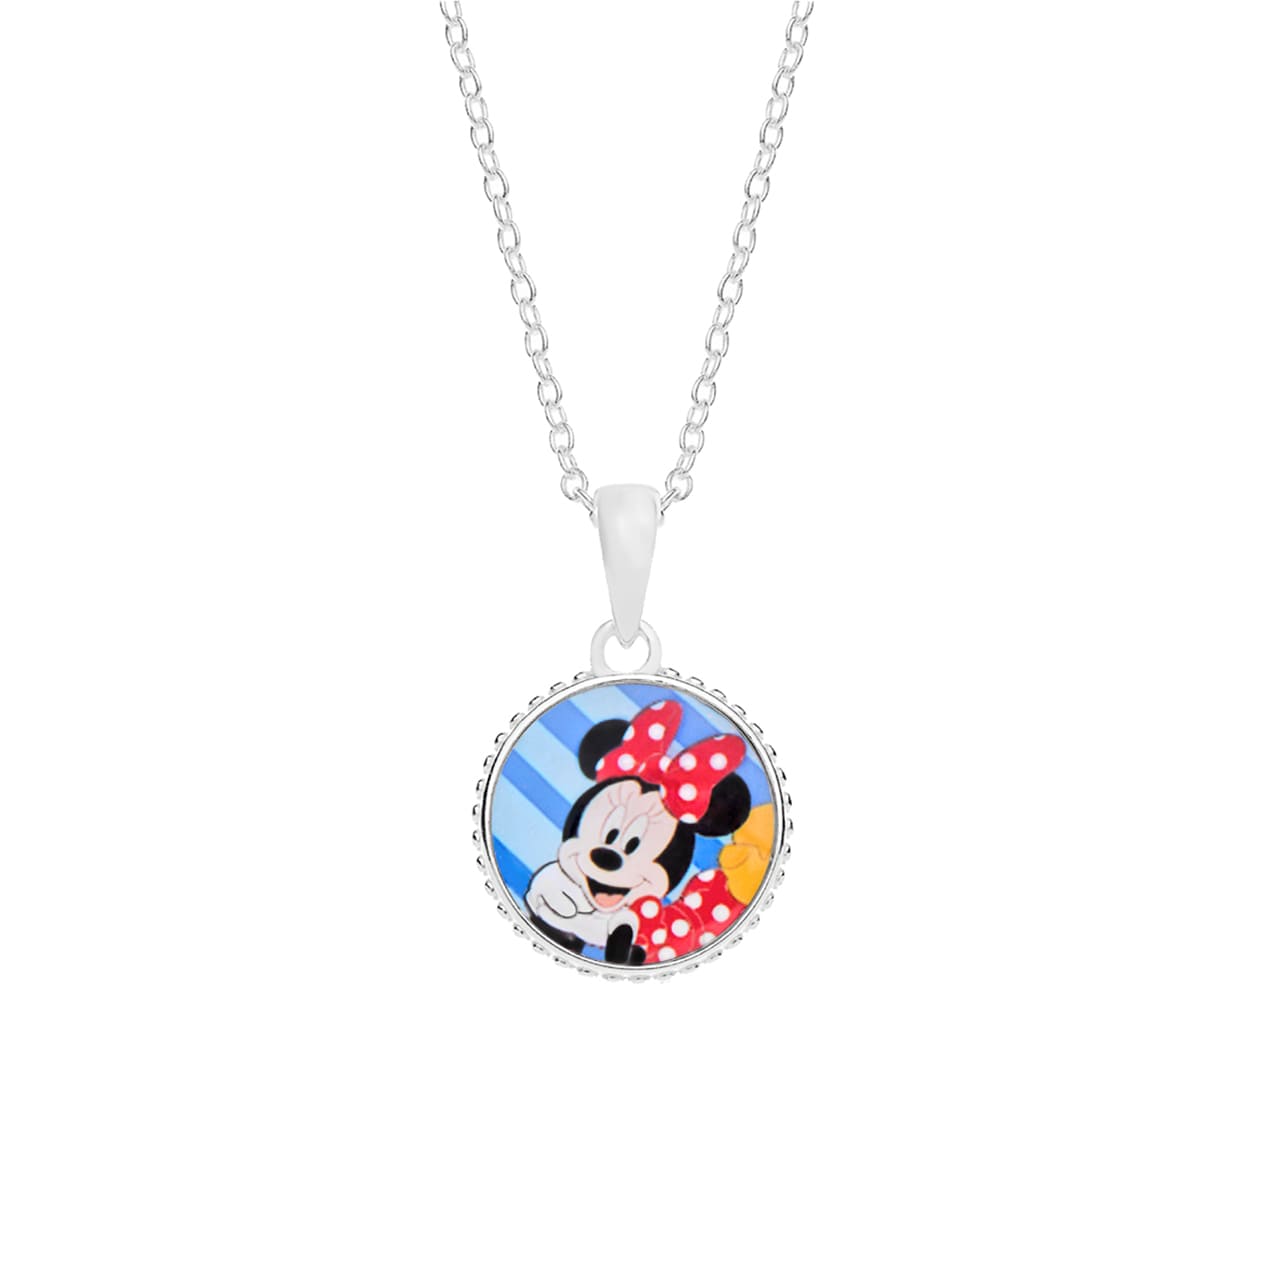 Disney_Halskette_Minnie_Mouse_Medaillon_Sterling_Silber_925_D9013